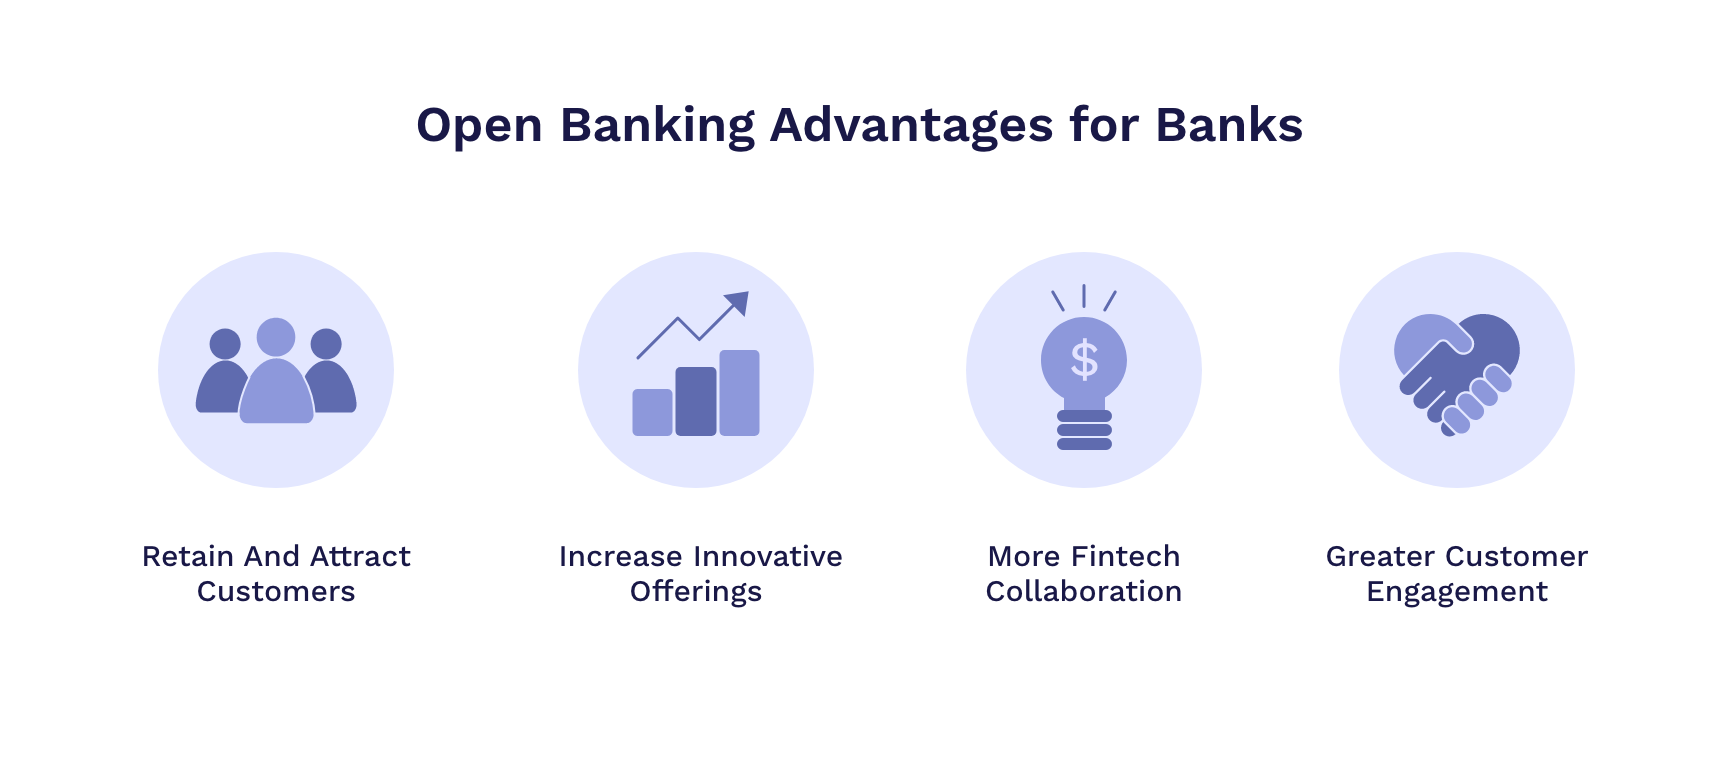 Open Banking Advantages for Banks